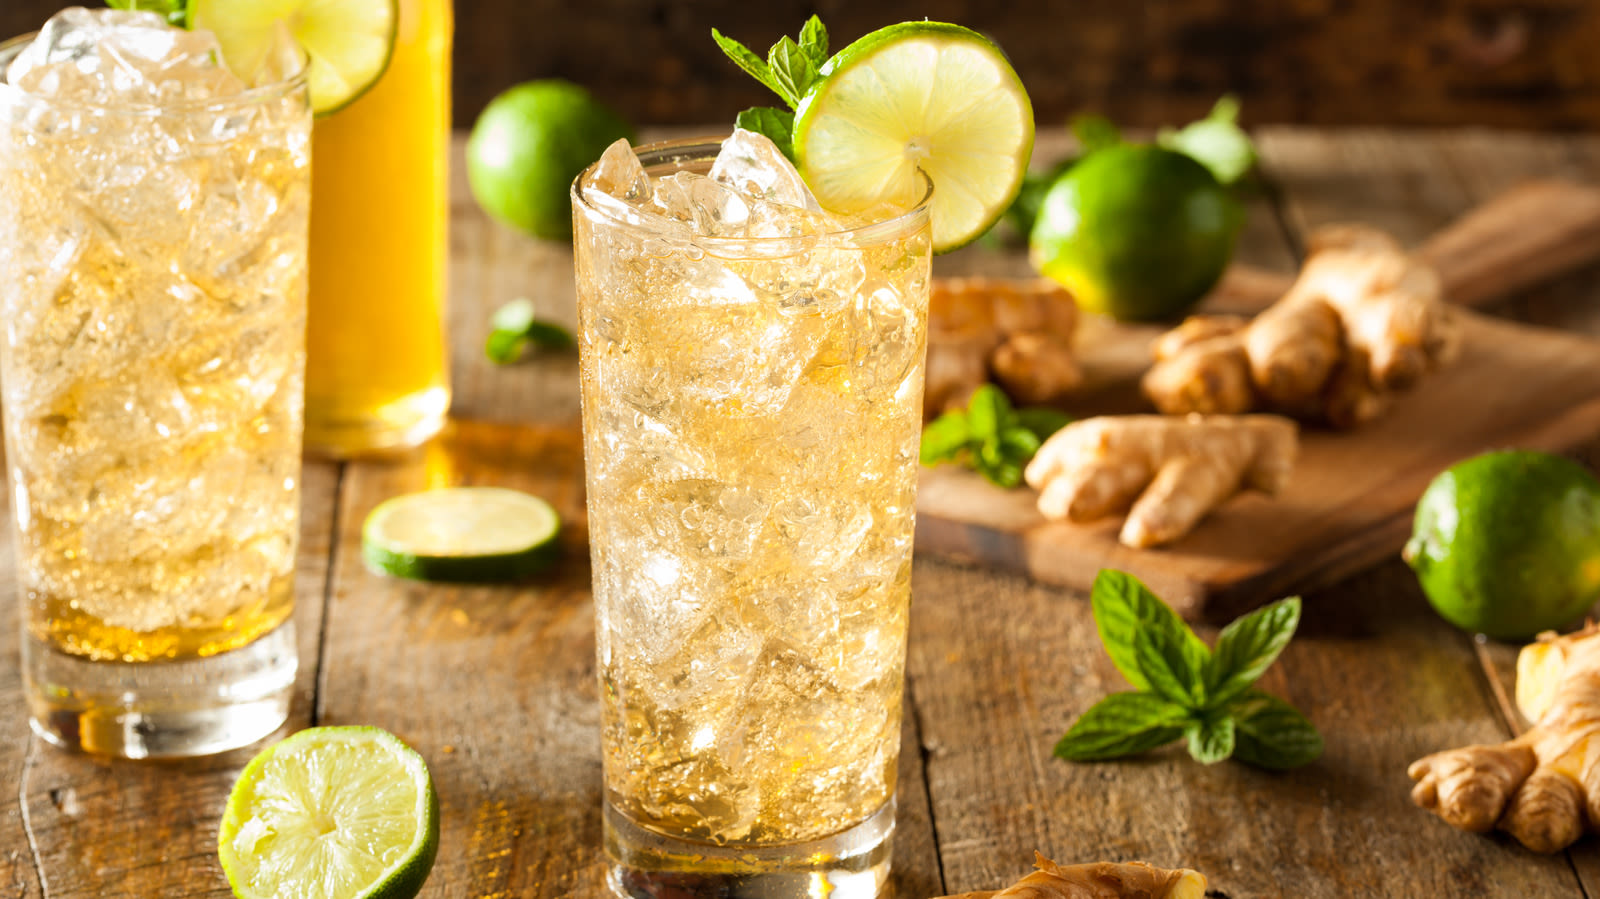 Ginger Ale Vs Ginger Beer: What's The Difference?